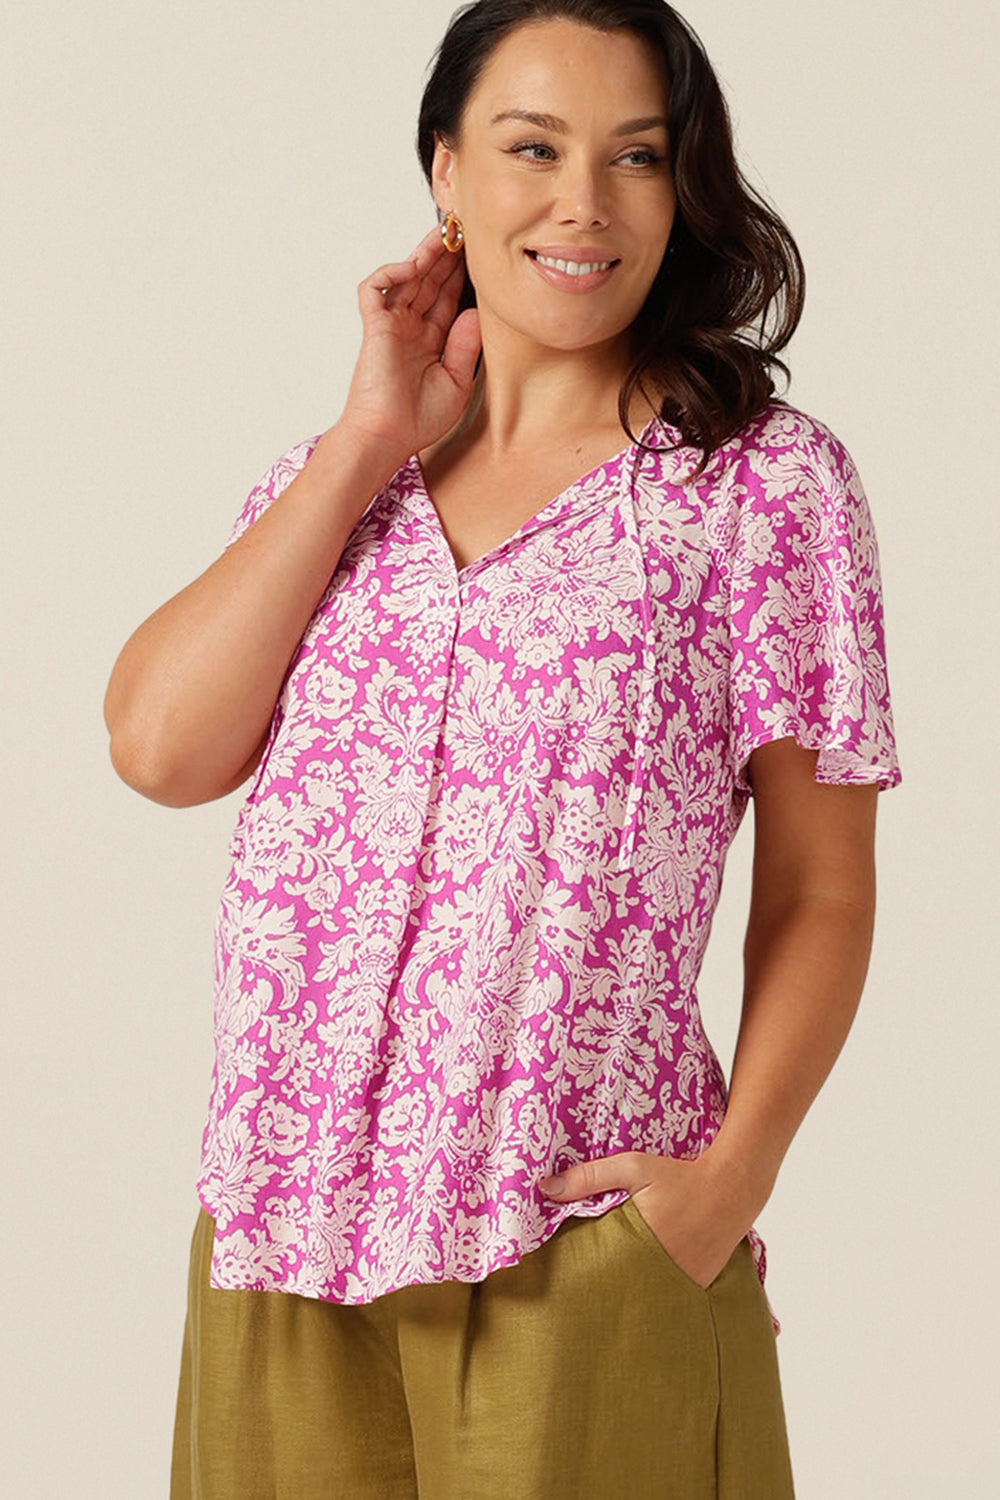 relaxed summer top with V-neckline and flutter sleeves. Made in eco-conscious, lightweight fabric.